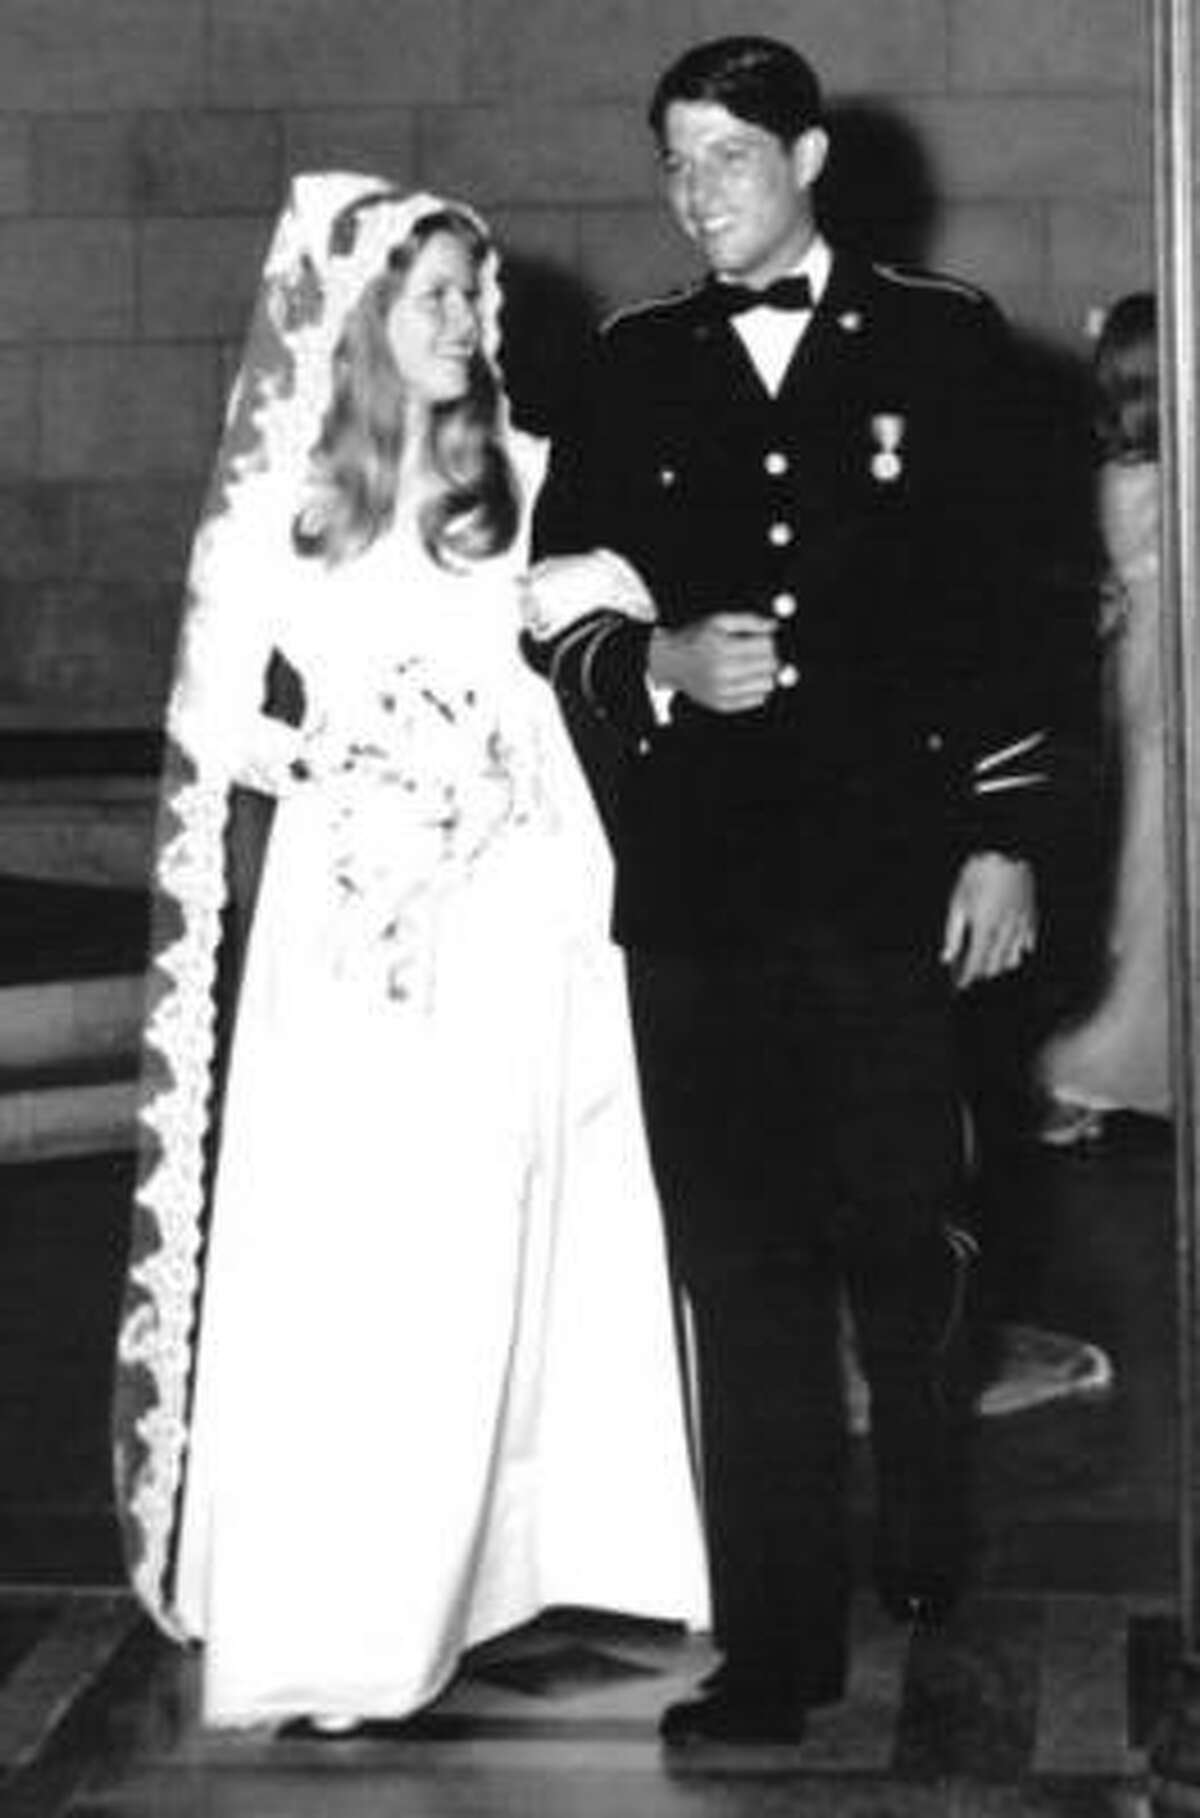 Mary Elizabeth "Tipper" Aitcheson and Al Gore were married May 19, 1970, in the Washington National Cathedral. They met at his senior prom at St. Albans School in 1965.